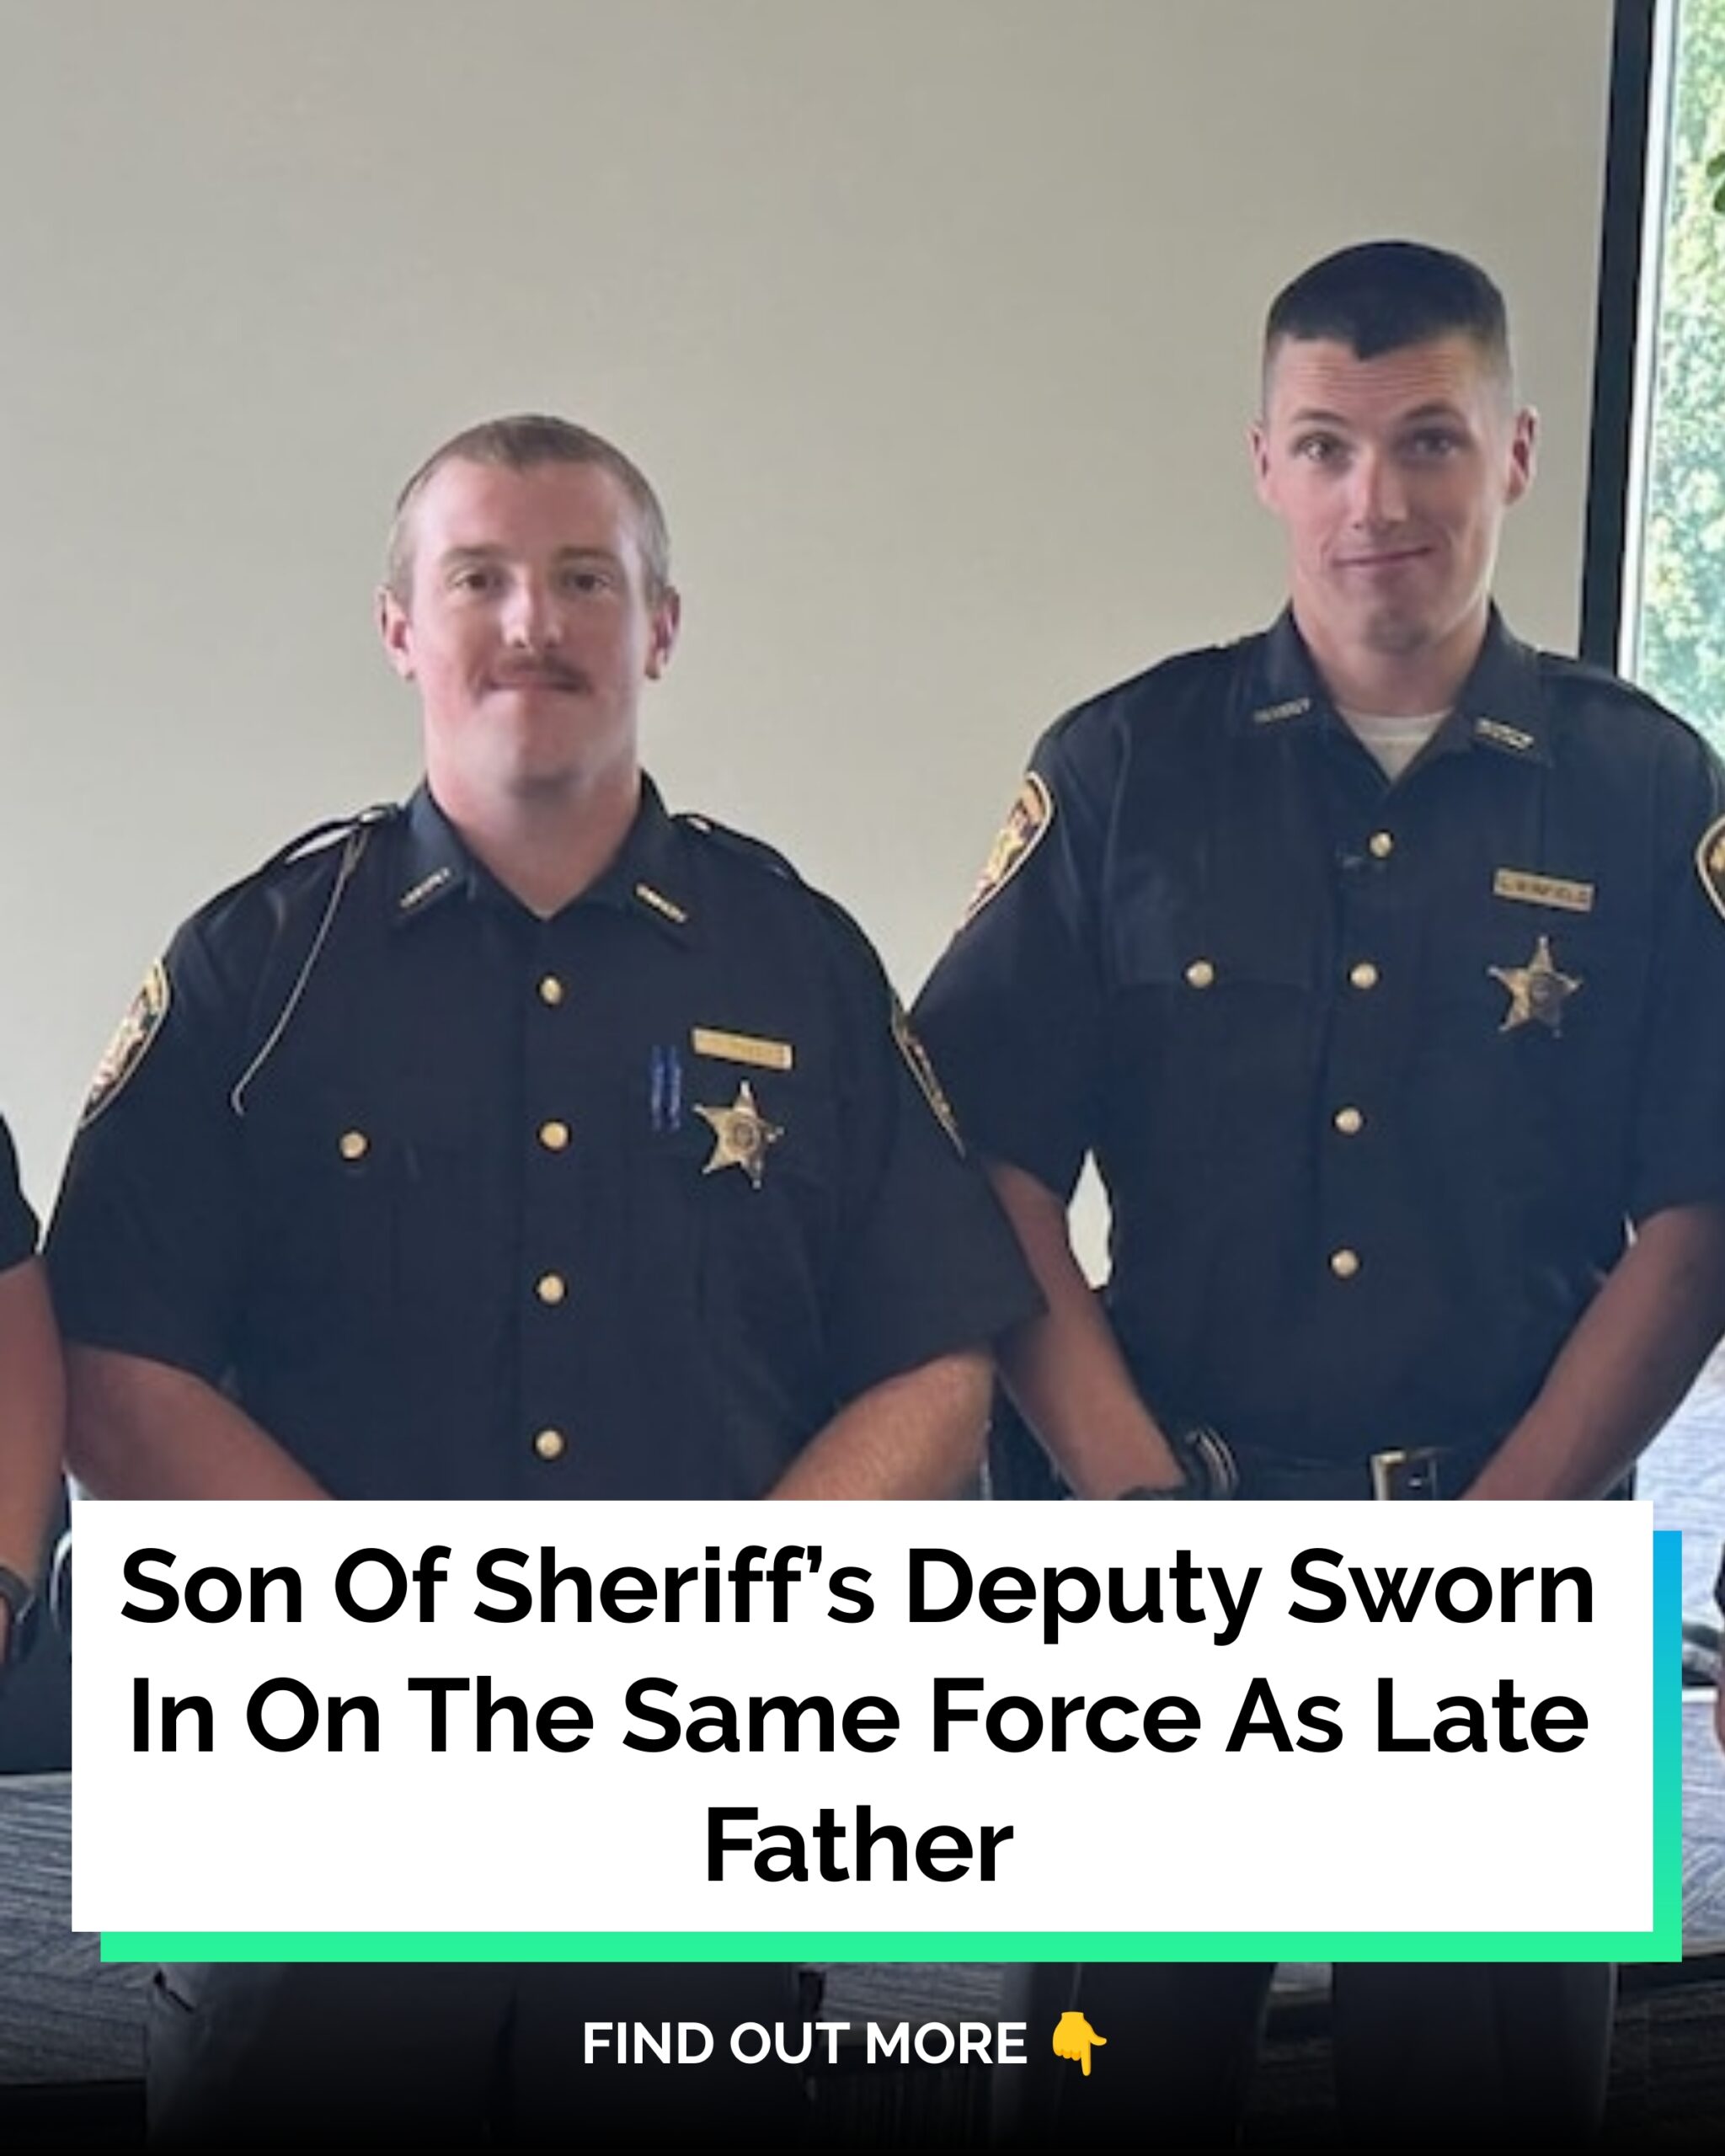 Son of sheriff’s deputy sworn in on the same force as late father